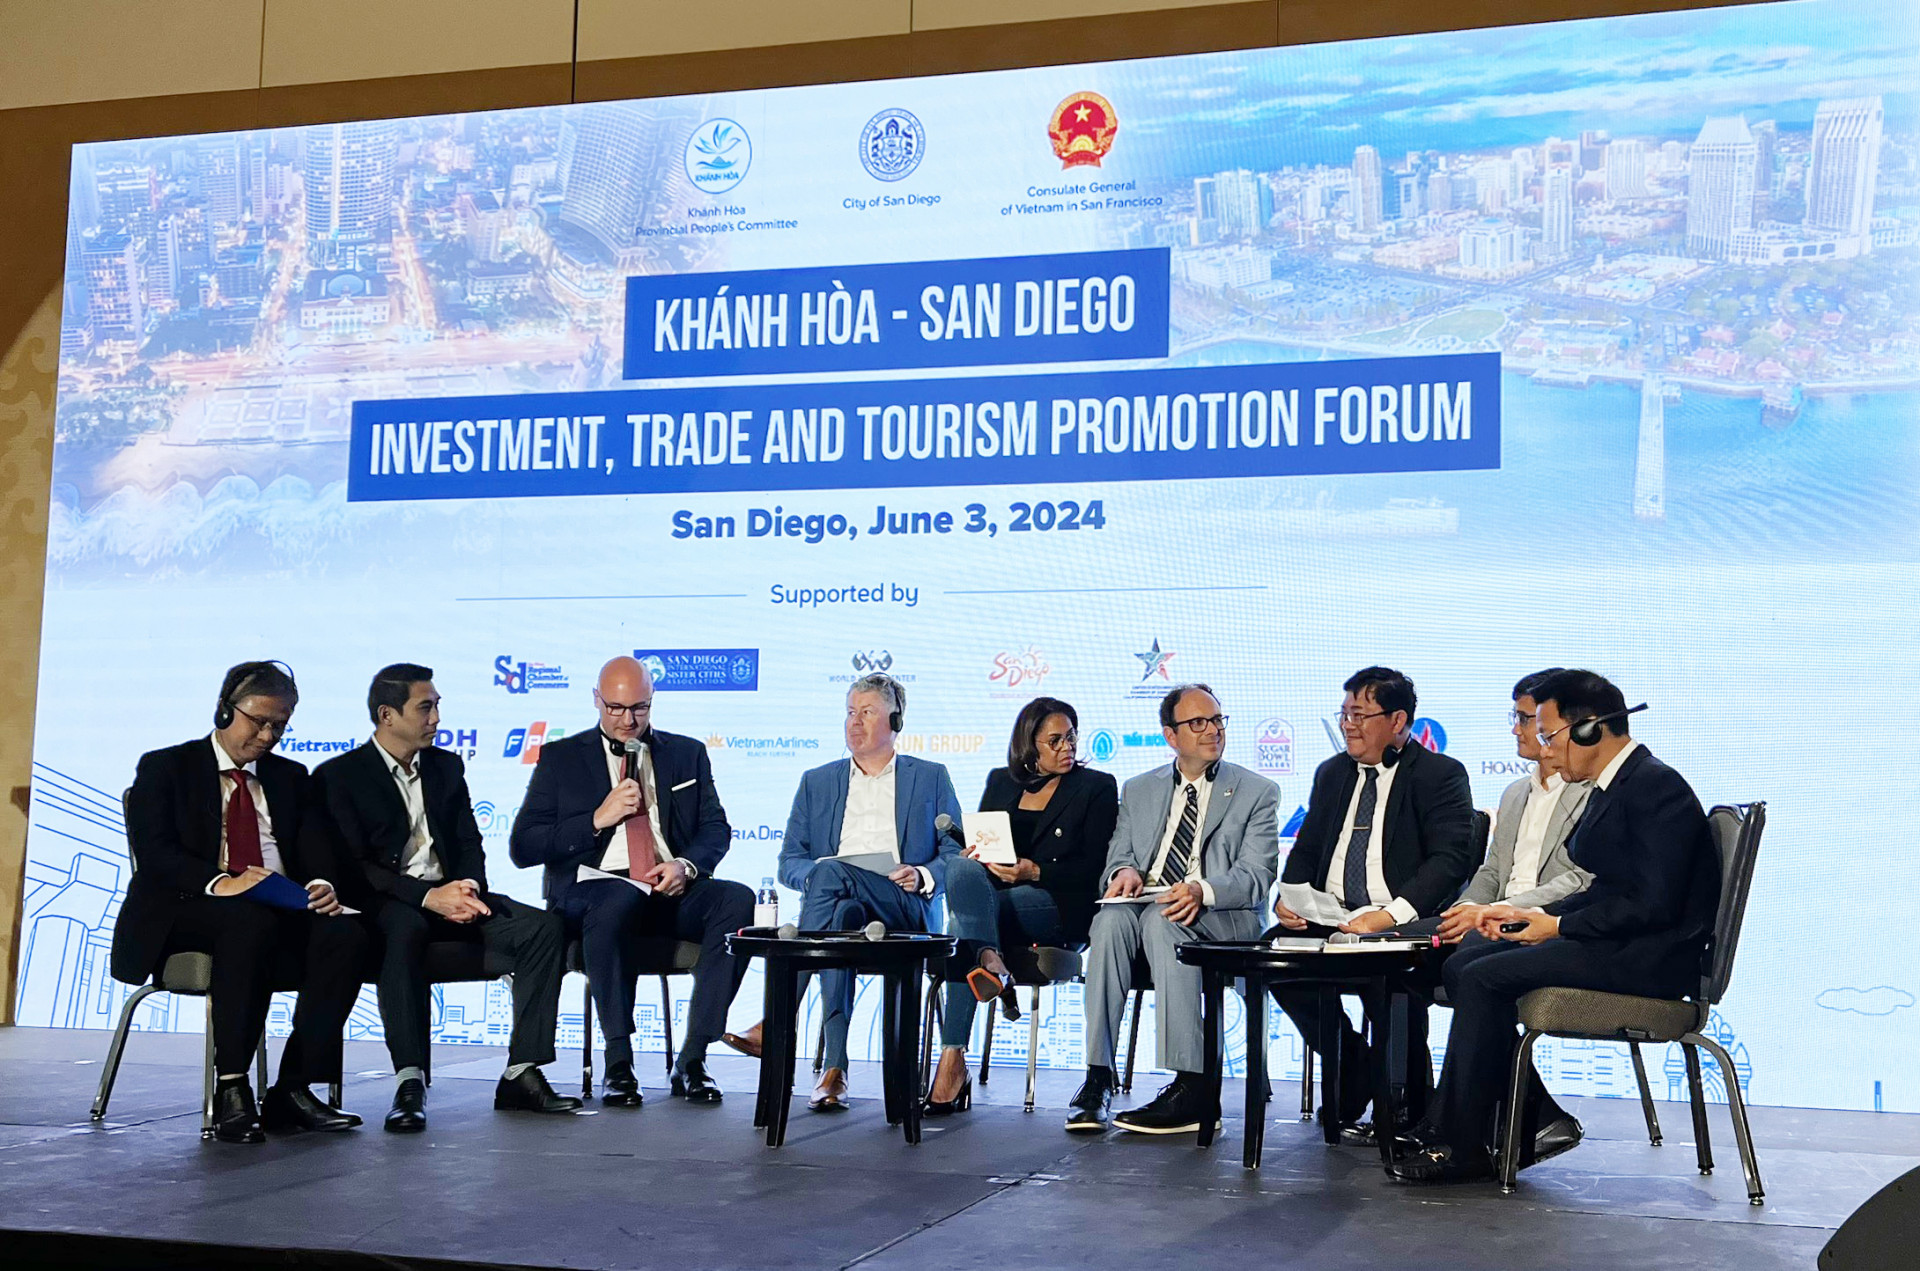 Positive signals from Khanh Hoa - San Diego Investment, Trade and Tourism Promotion Forum